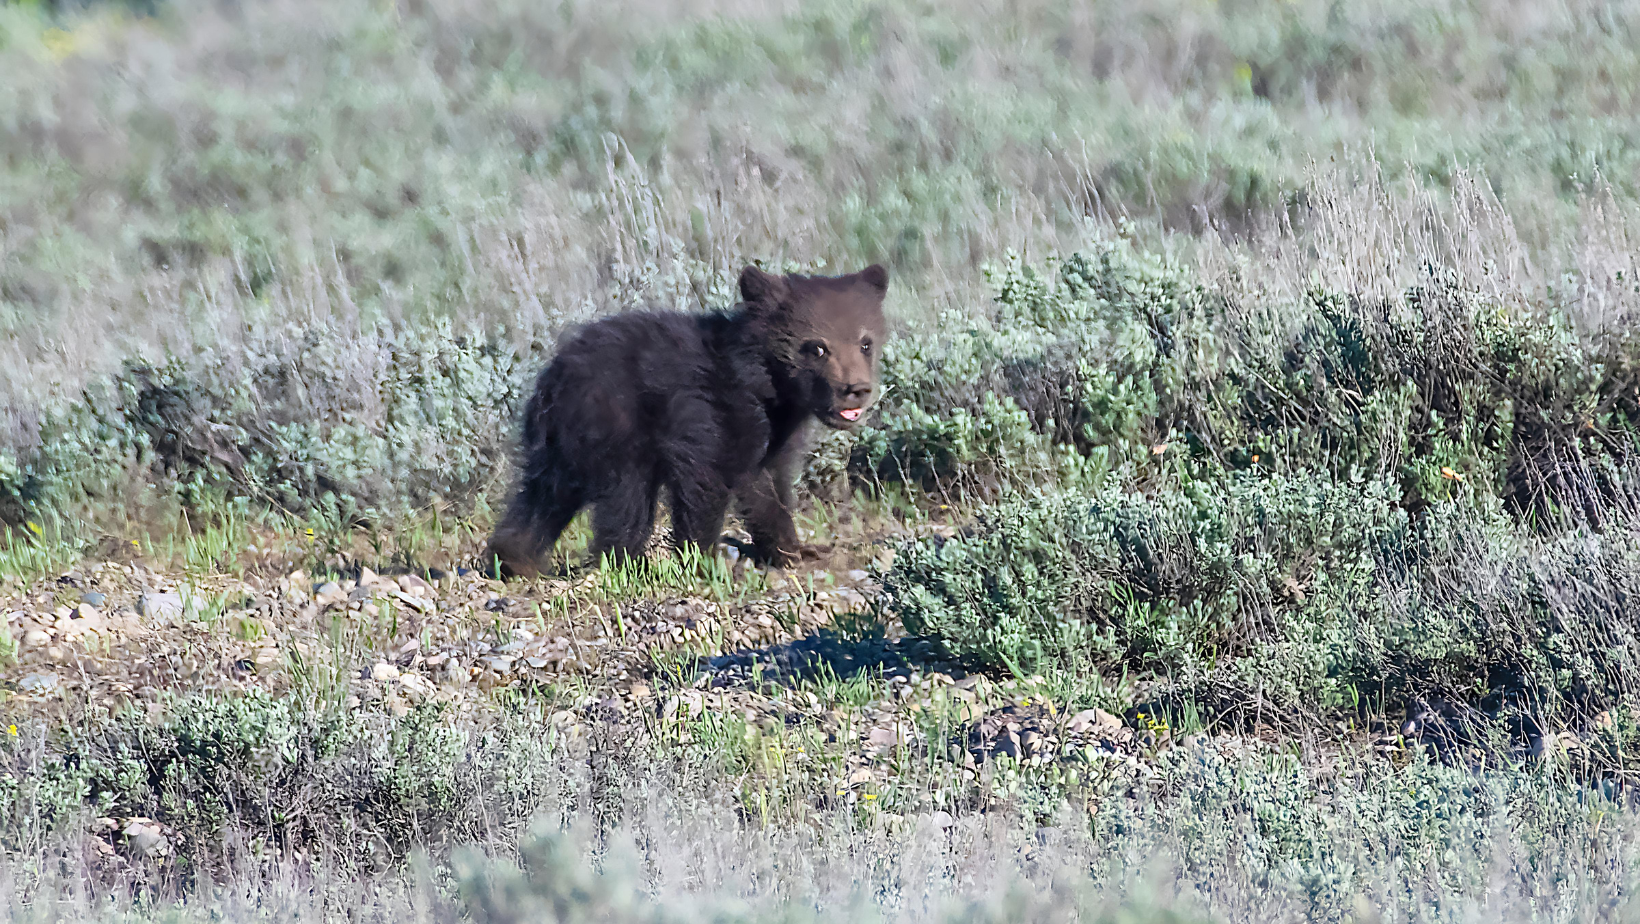 Grizzly bear cub walking free from mother bear. Image Credit: John Morrison from Getty Images Signature via Canva Pro.